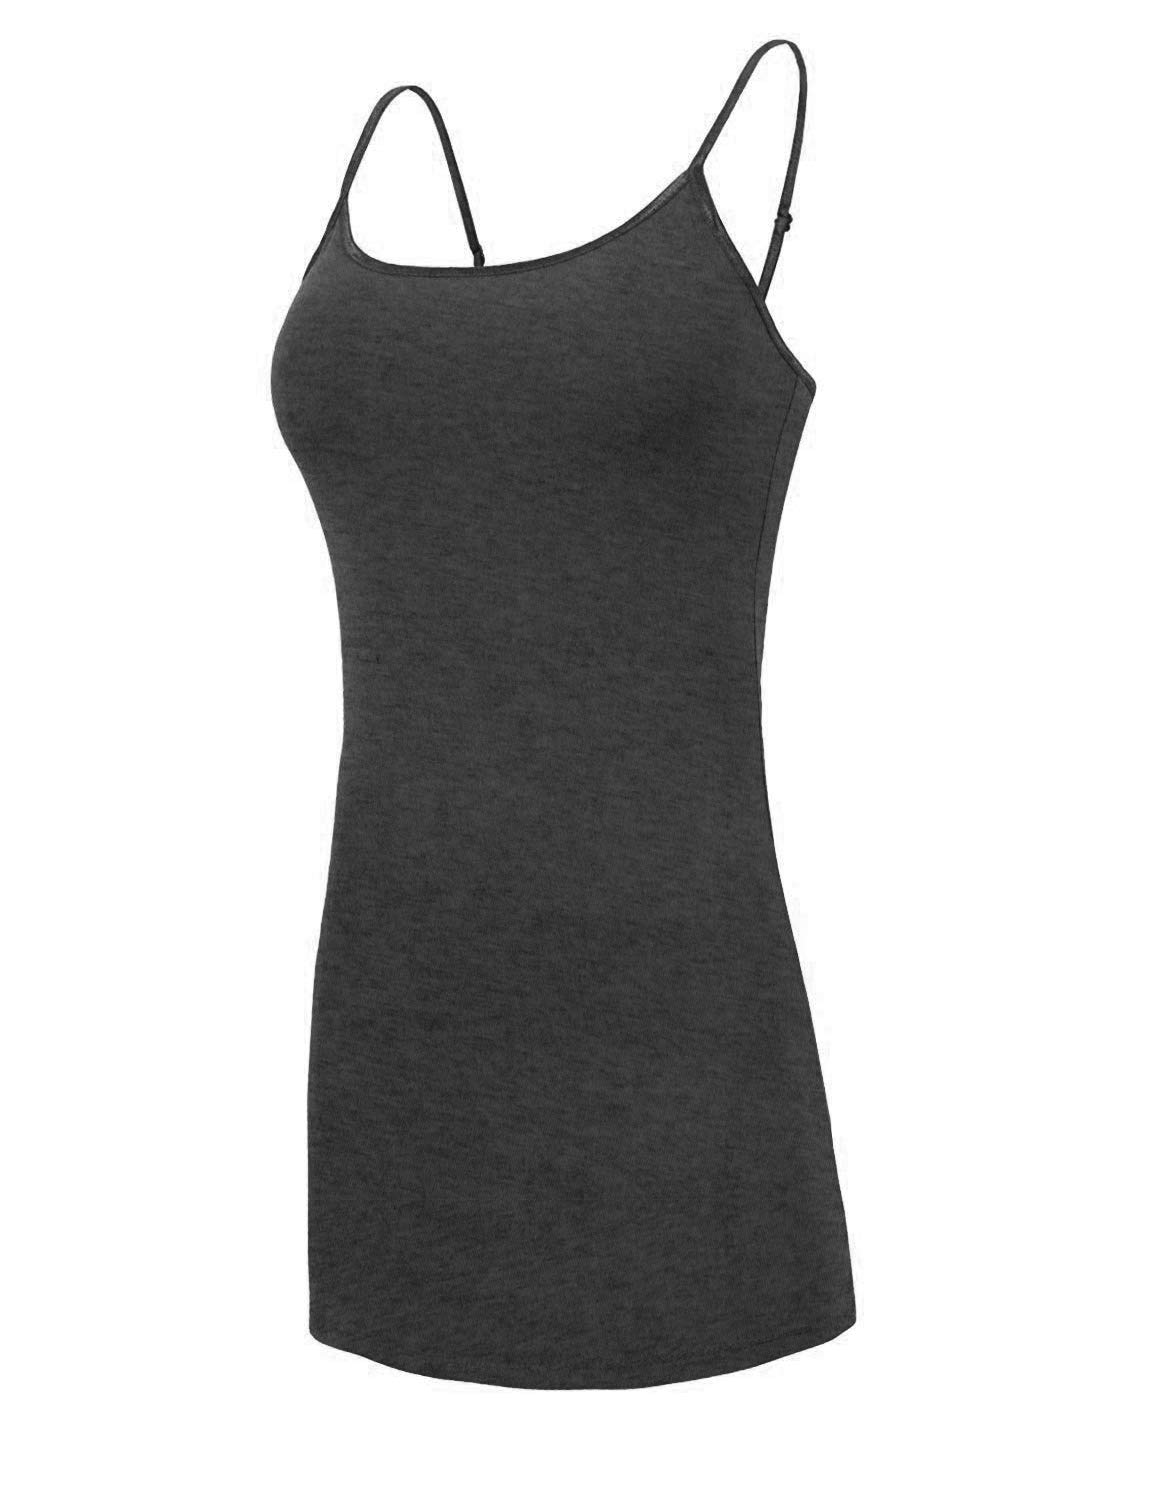 J. LOVNY Womens Basic Solid Spaghetti Strap Fitted Tunic Sleeveless Top Dress